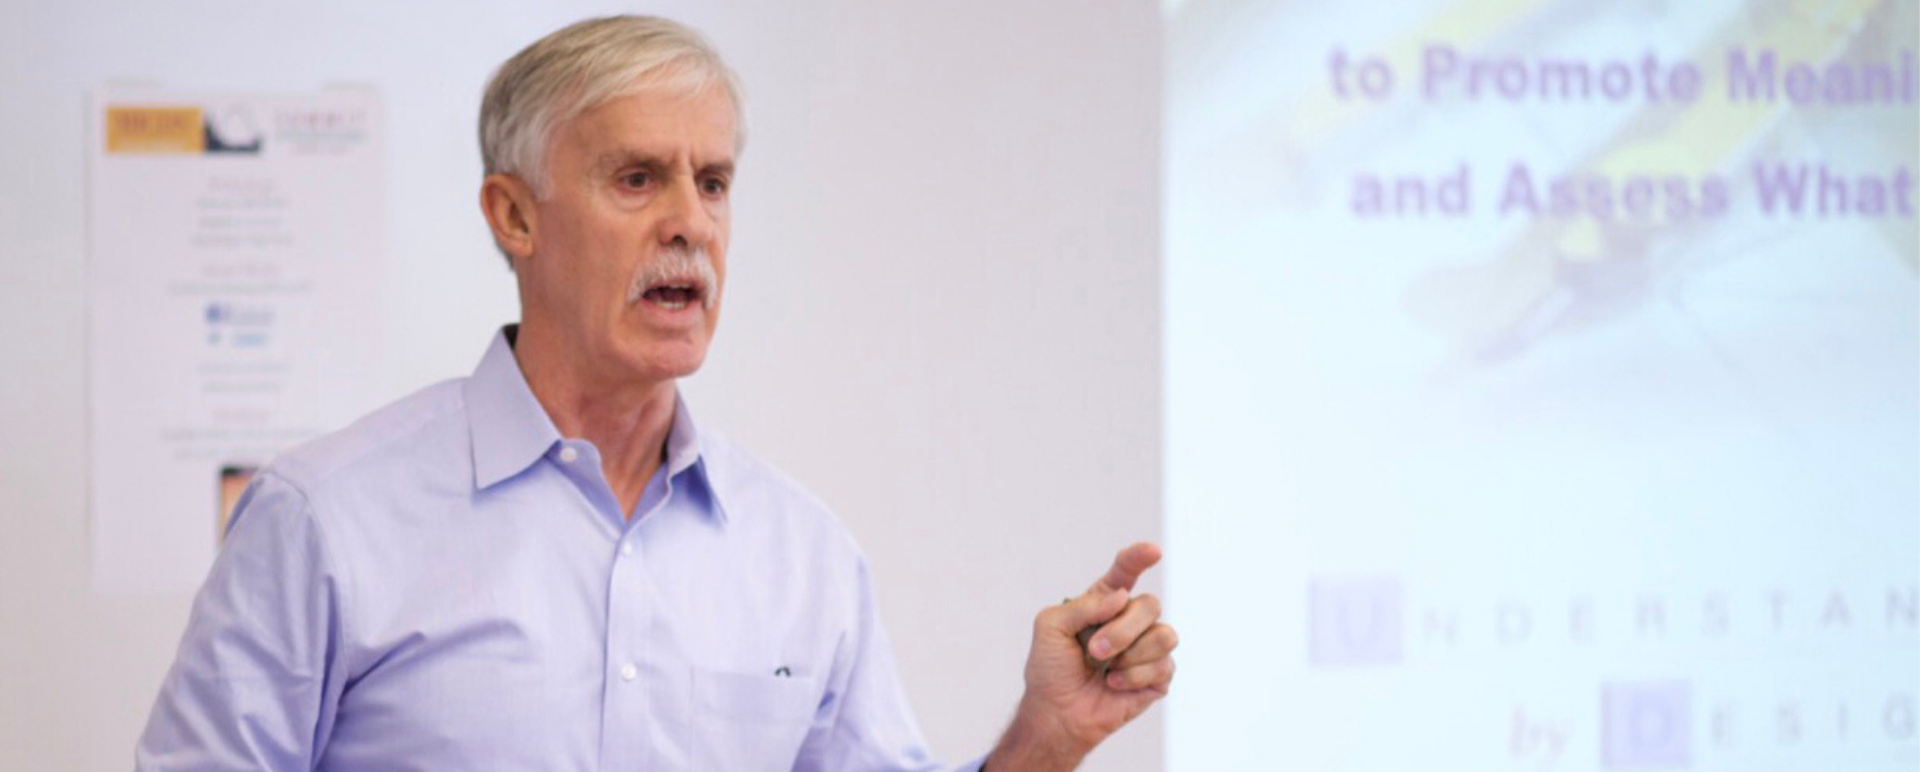 IDEA Webinar – Virtual Curriculum Design with Jay McTighe: Timely Units for COVID-19